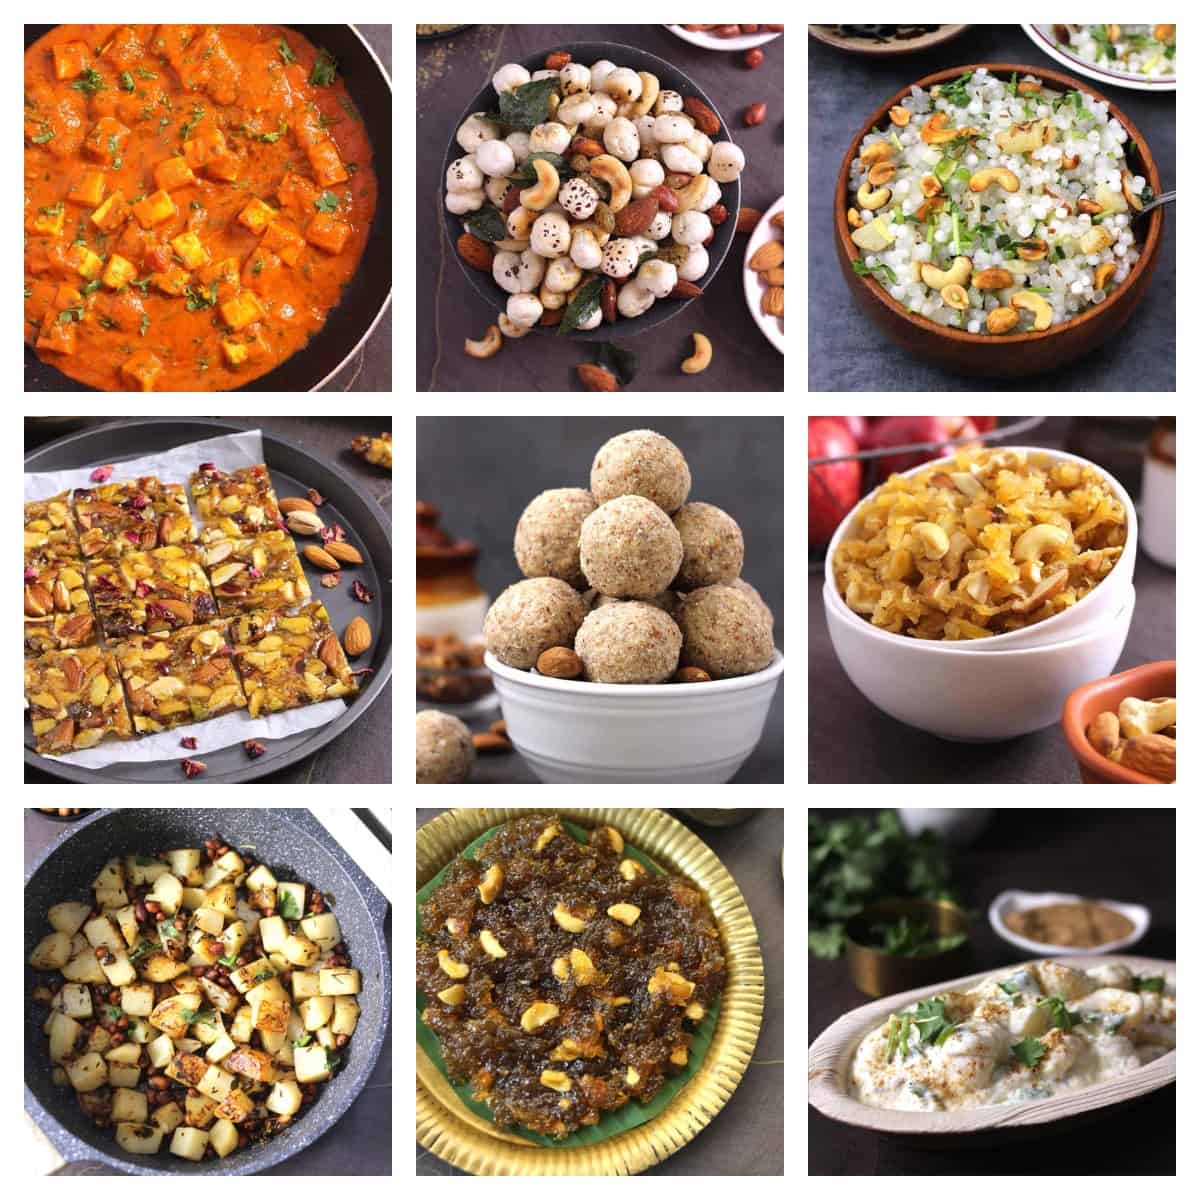 Picture of Indian vrat recipes or fasting food recipes that includes meals, desserts, snacks and drinks. 